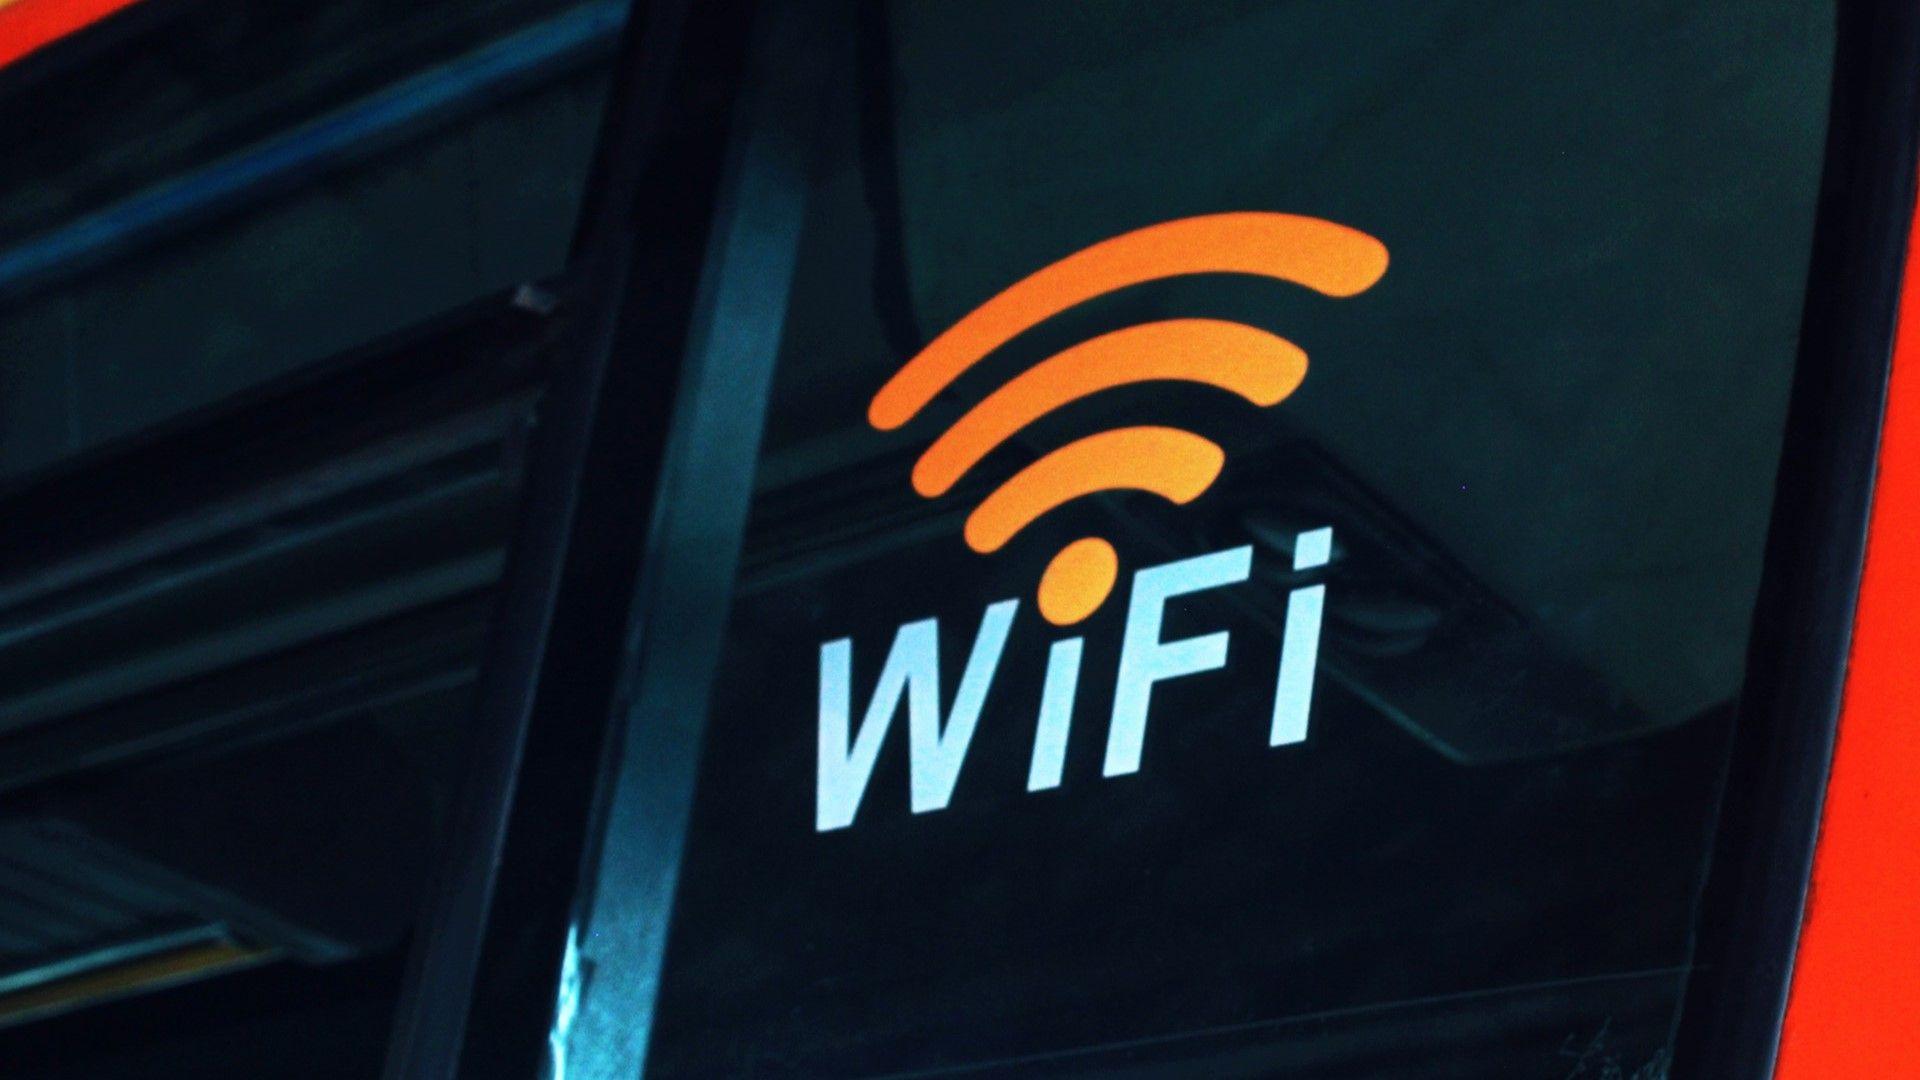 A colorful Wi-Fi sign on a dark background